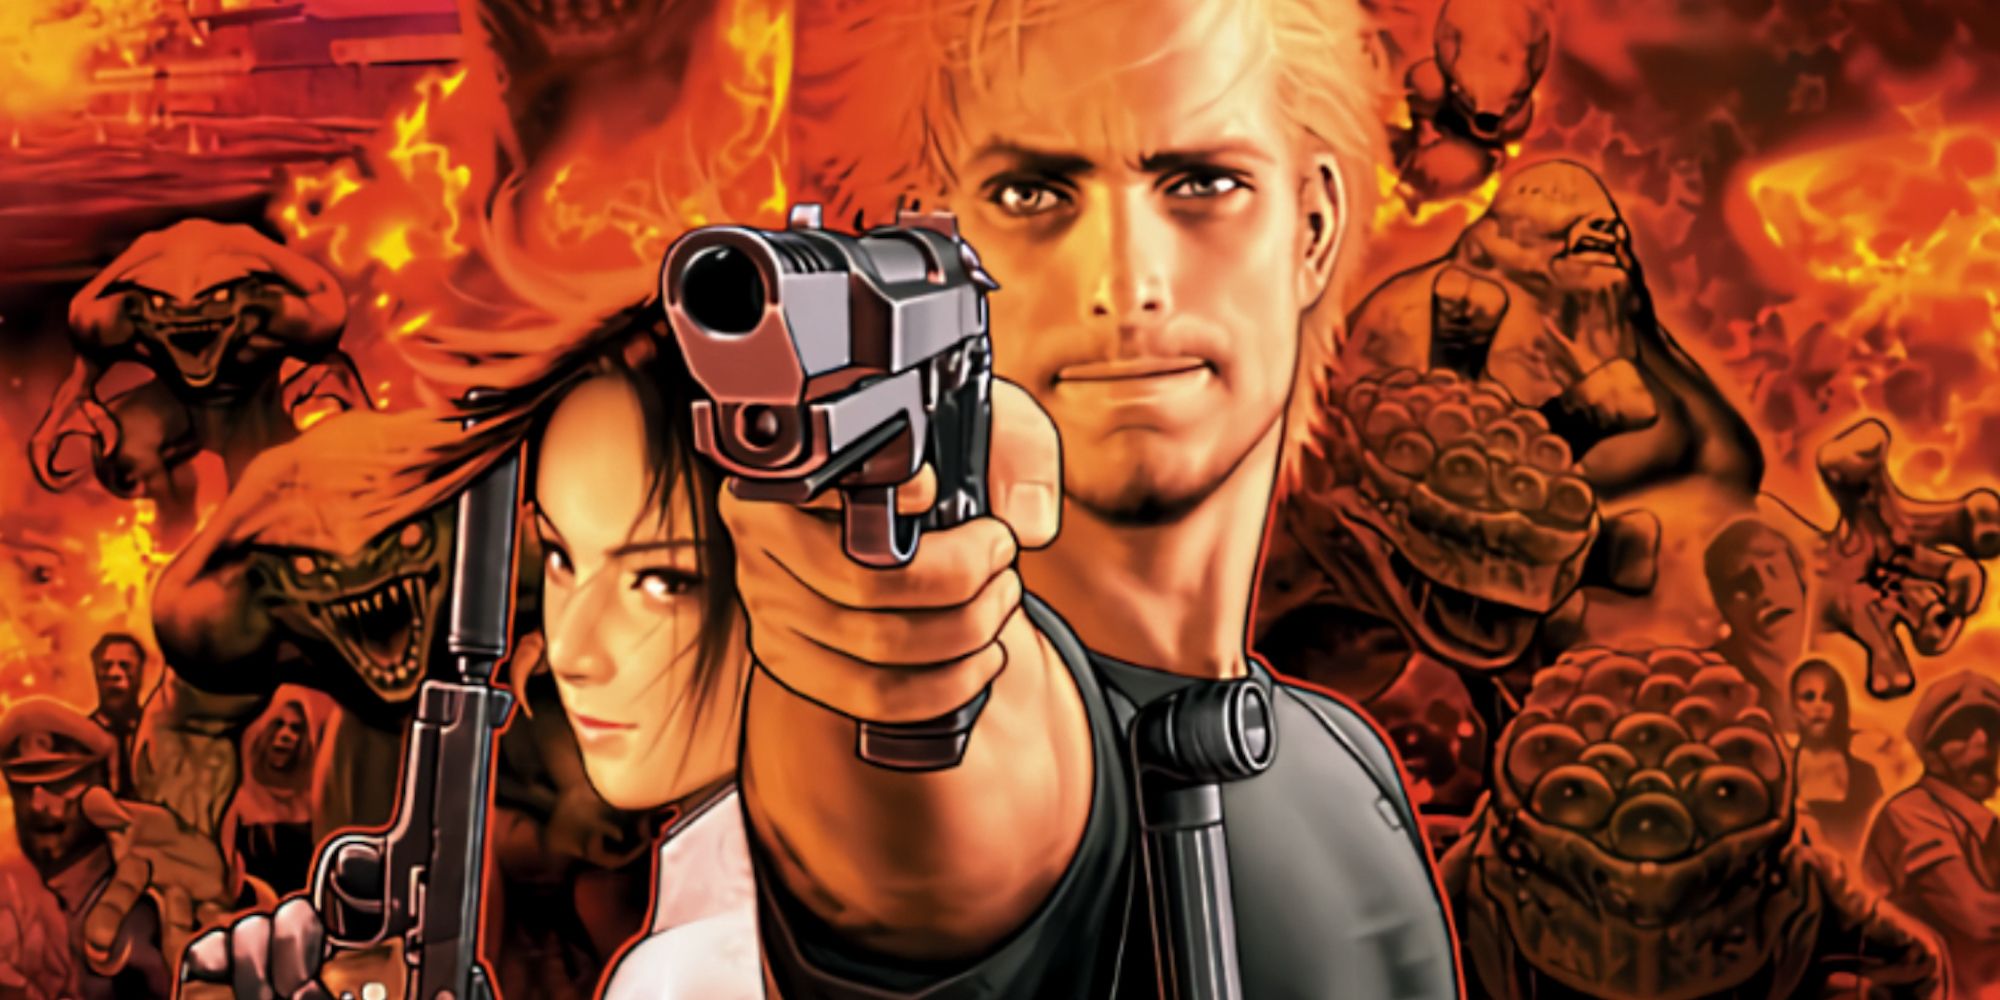 Promo art featuring characters in Resident Evil Dead Aim